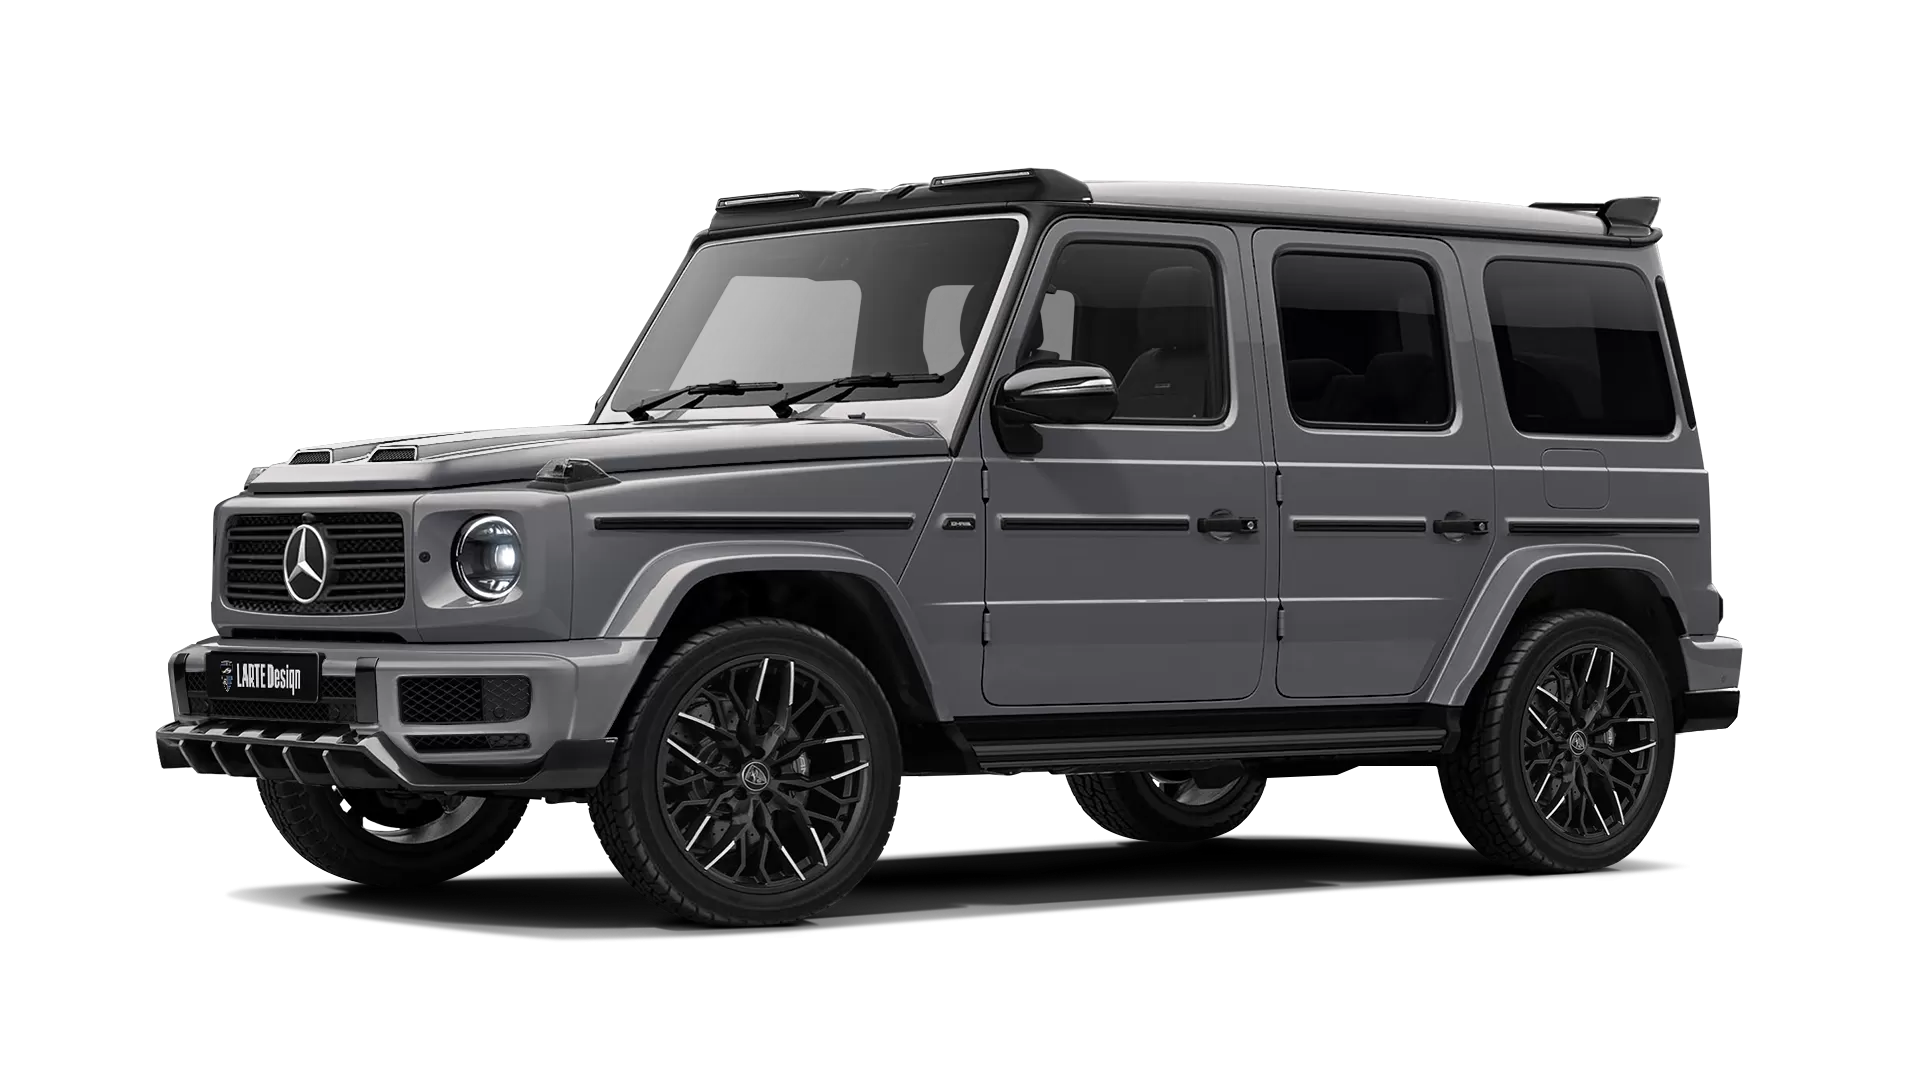 Mercedes G class W463 with painted body kit: front view shown in Mojave Silver